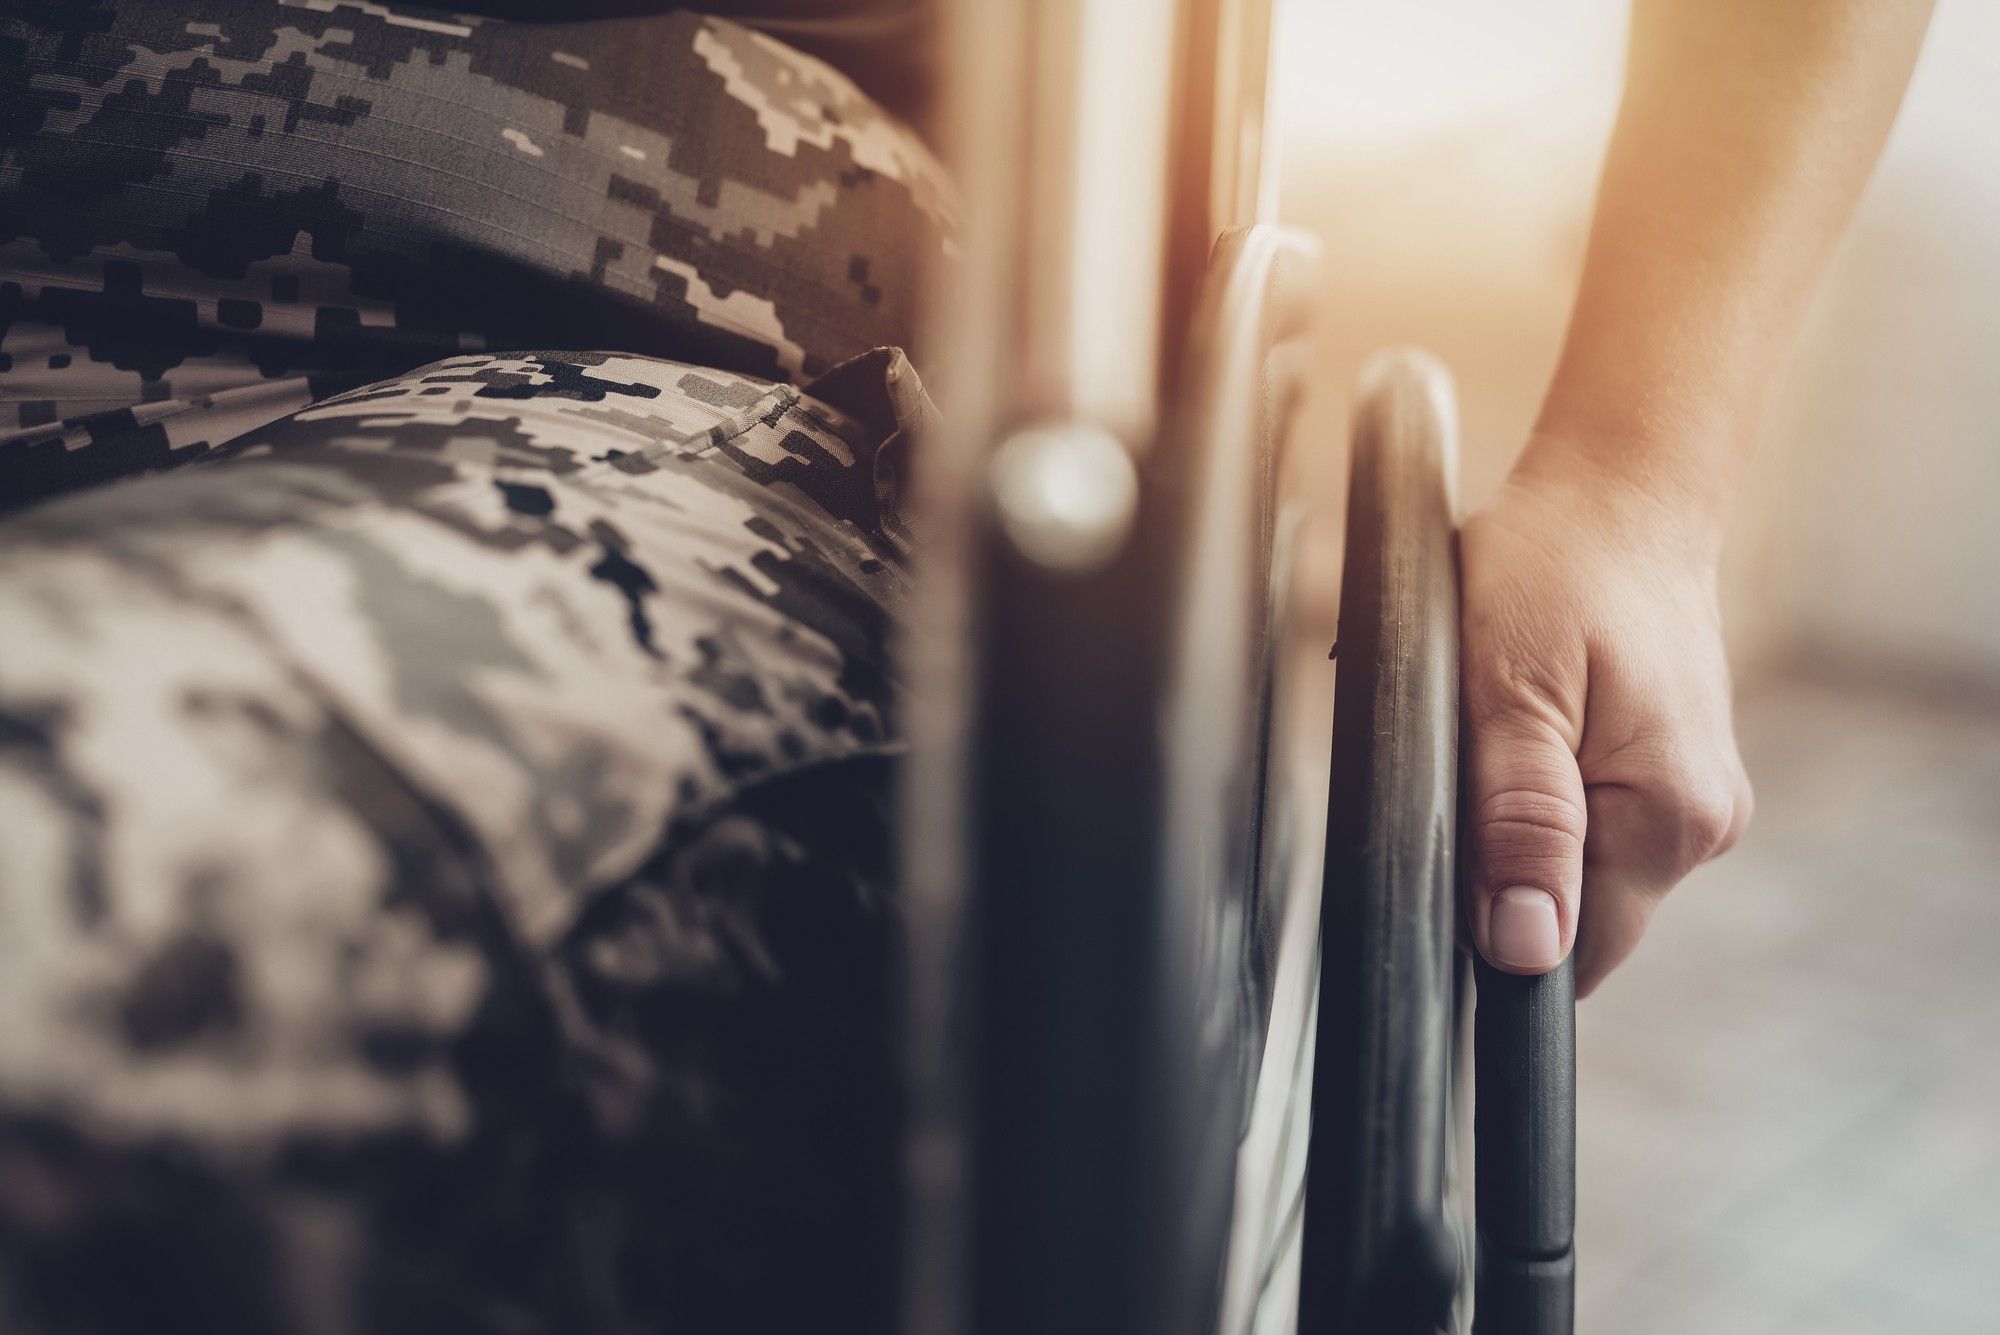 Lower half of a veteran in a wheelchair regarding the federal court ruling in favor of the injured veterans' disability benefits class action lawsuit